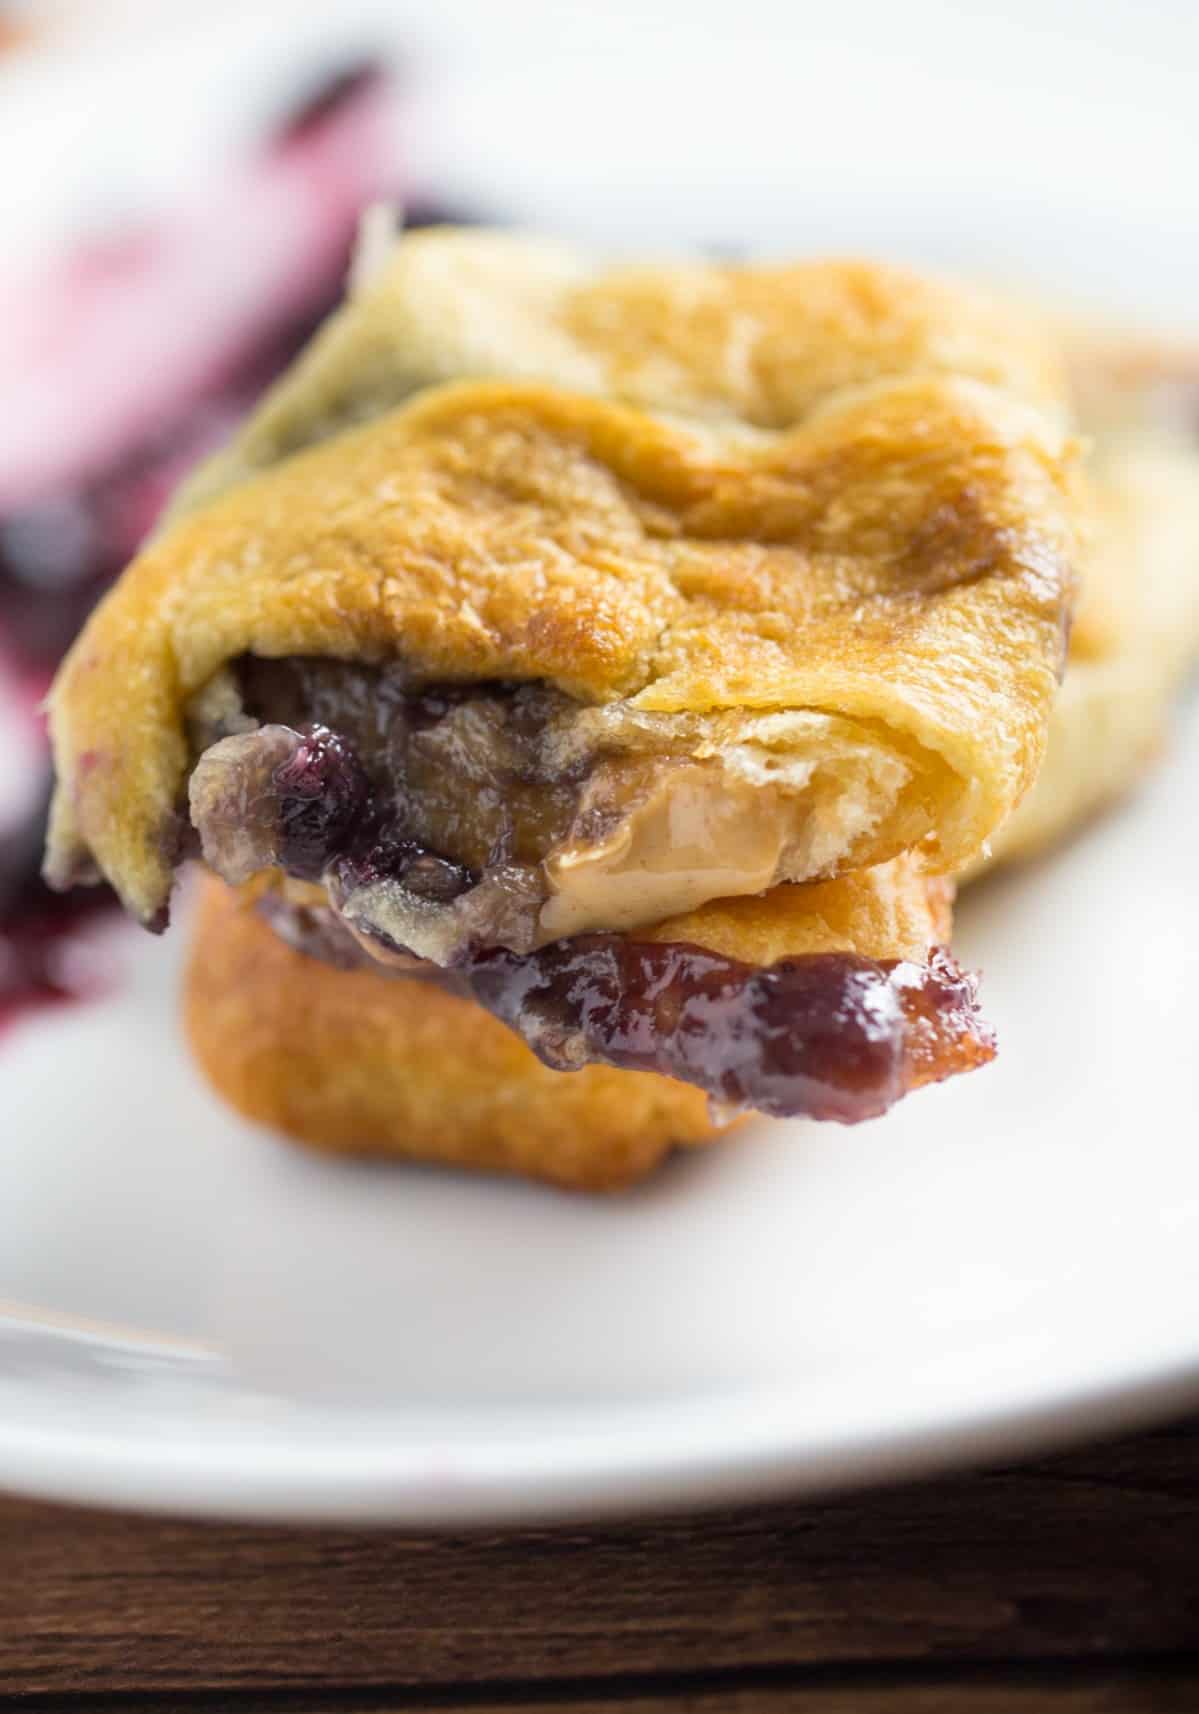 This jelly roll recipe includes an upgrade over the standard PB&J sandwich - you use crescent rolls as a buttery, flakey replacement for regular bread.